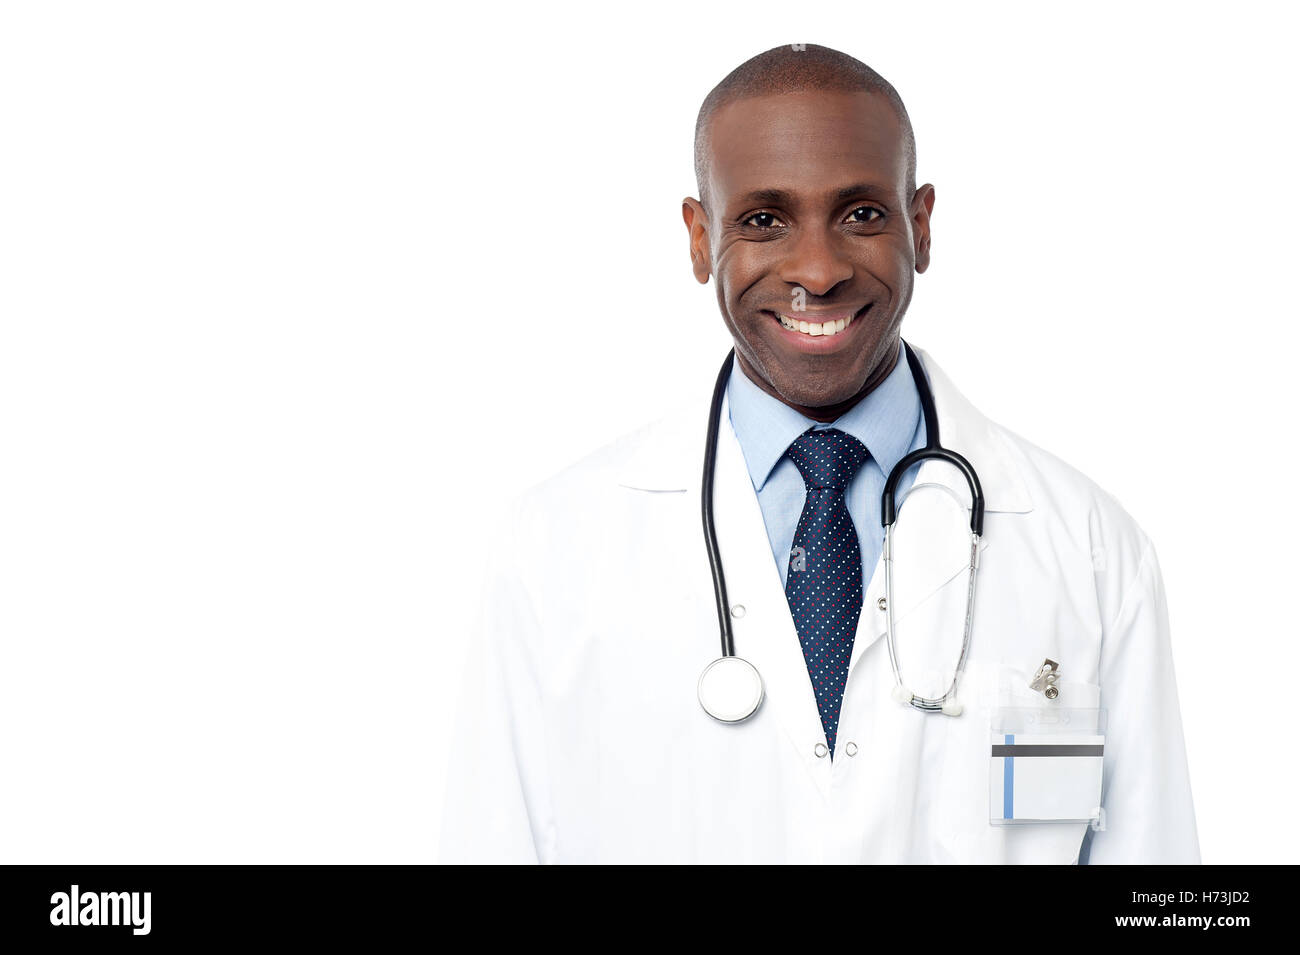 doctor physician medic medical practicioner guy career successful succesful job health isolated medicinally medical american Stock Photo